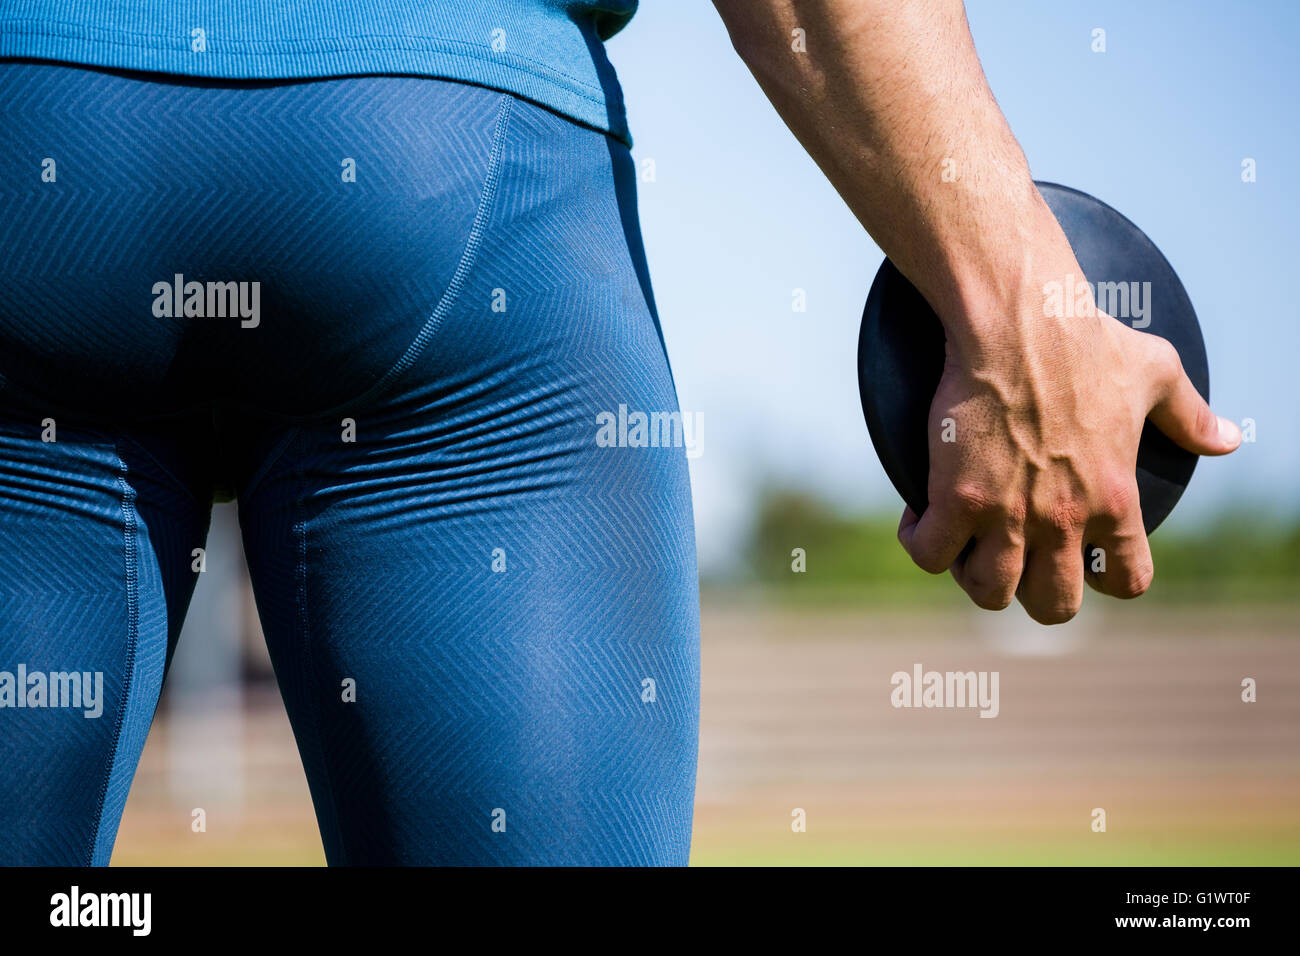 Athlete holding a discus Stock Photo